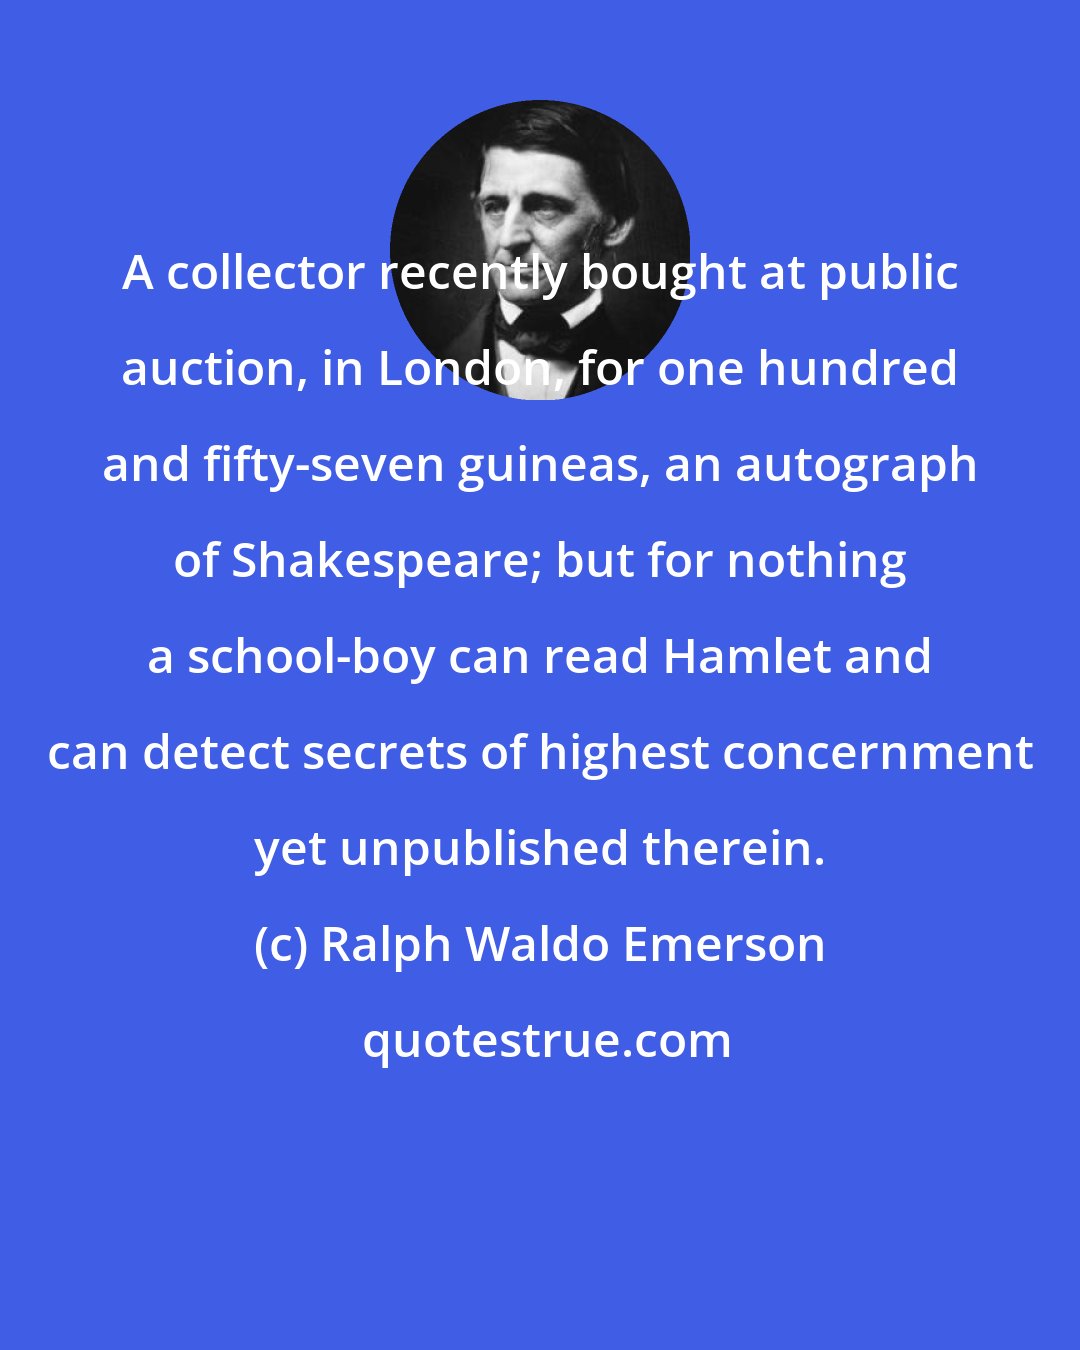 Ralph Waldo Emerson: A collector recently bought at public auction, in London, for one hundred and fifty-seven guineas, an autograph of Shakespeare; but for nothing a school-boy can read Hamlet and can detect secrets of highest concernment yet unpublished therein.